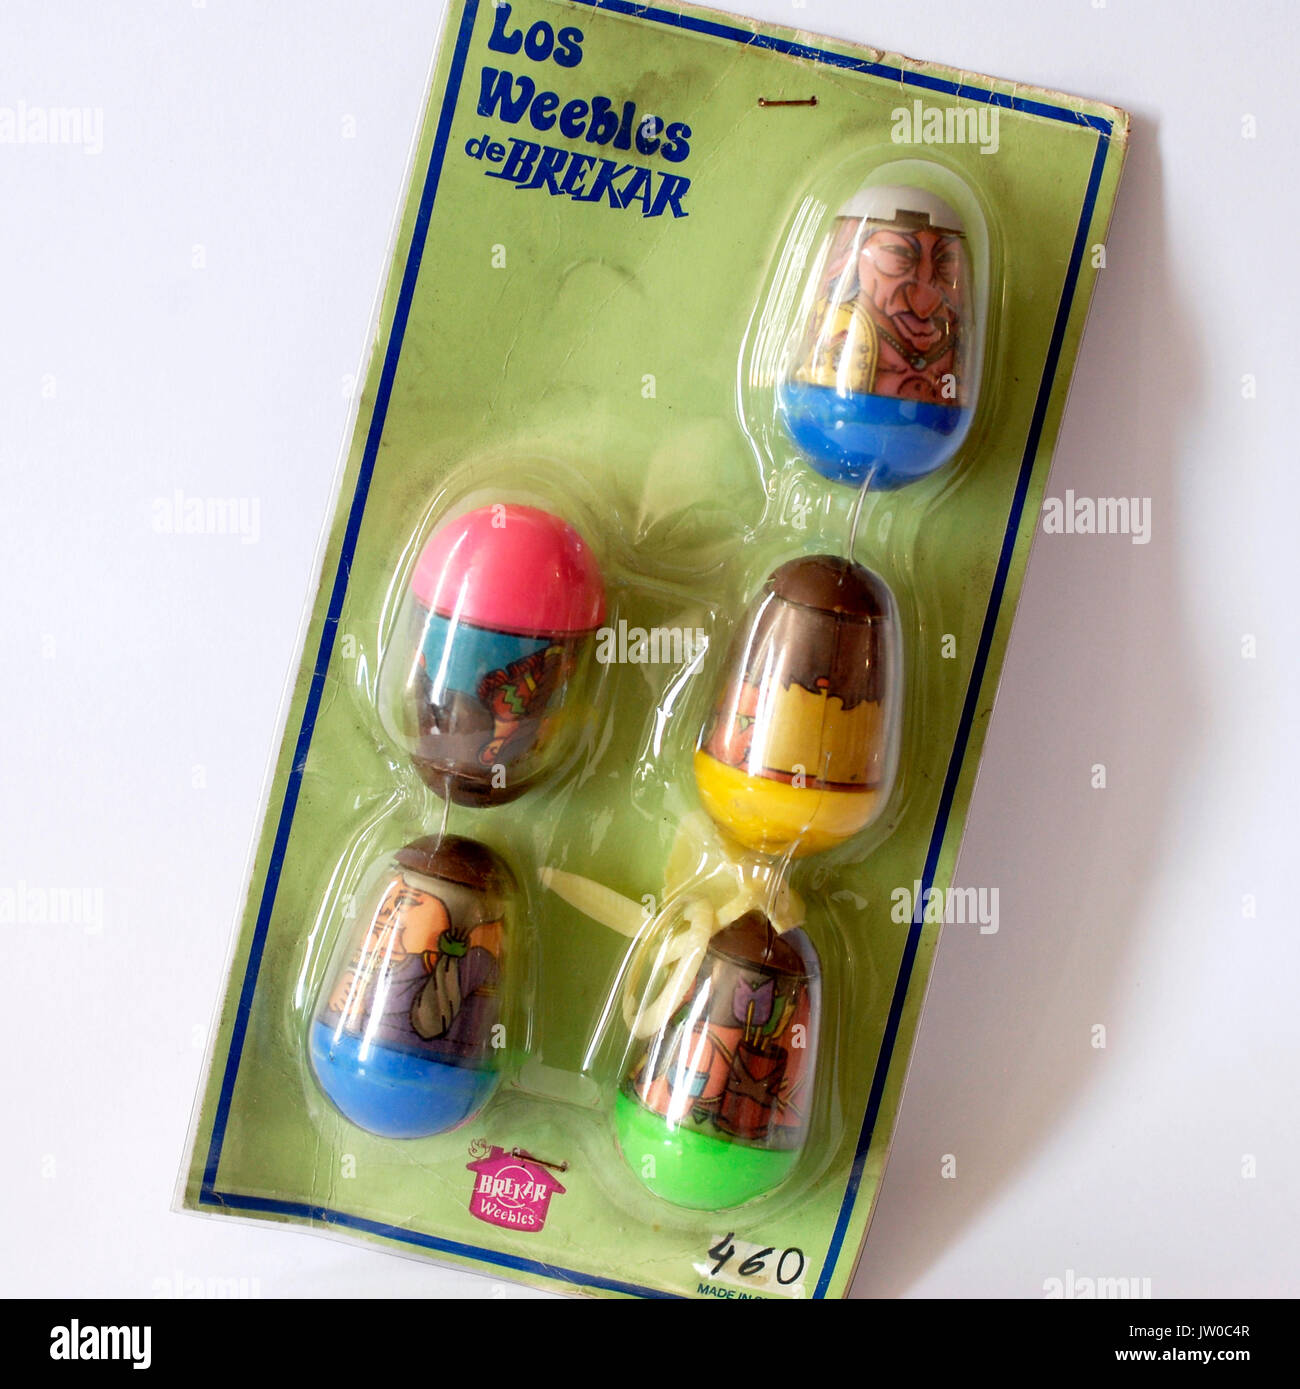 Vintage Spanish collectible toy Los Weebles de Bekar. Indios, plastic blister. from the store Stock Photo